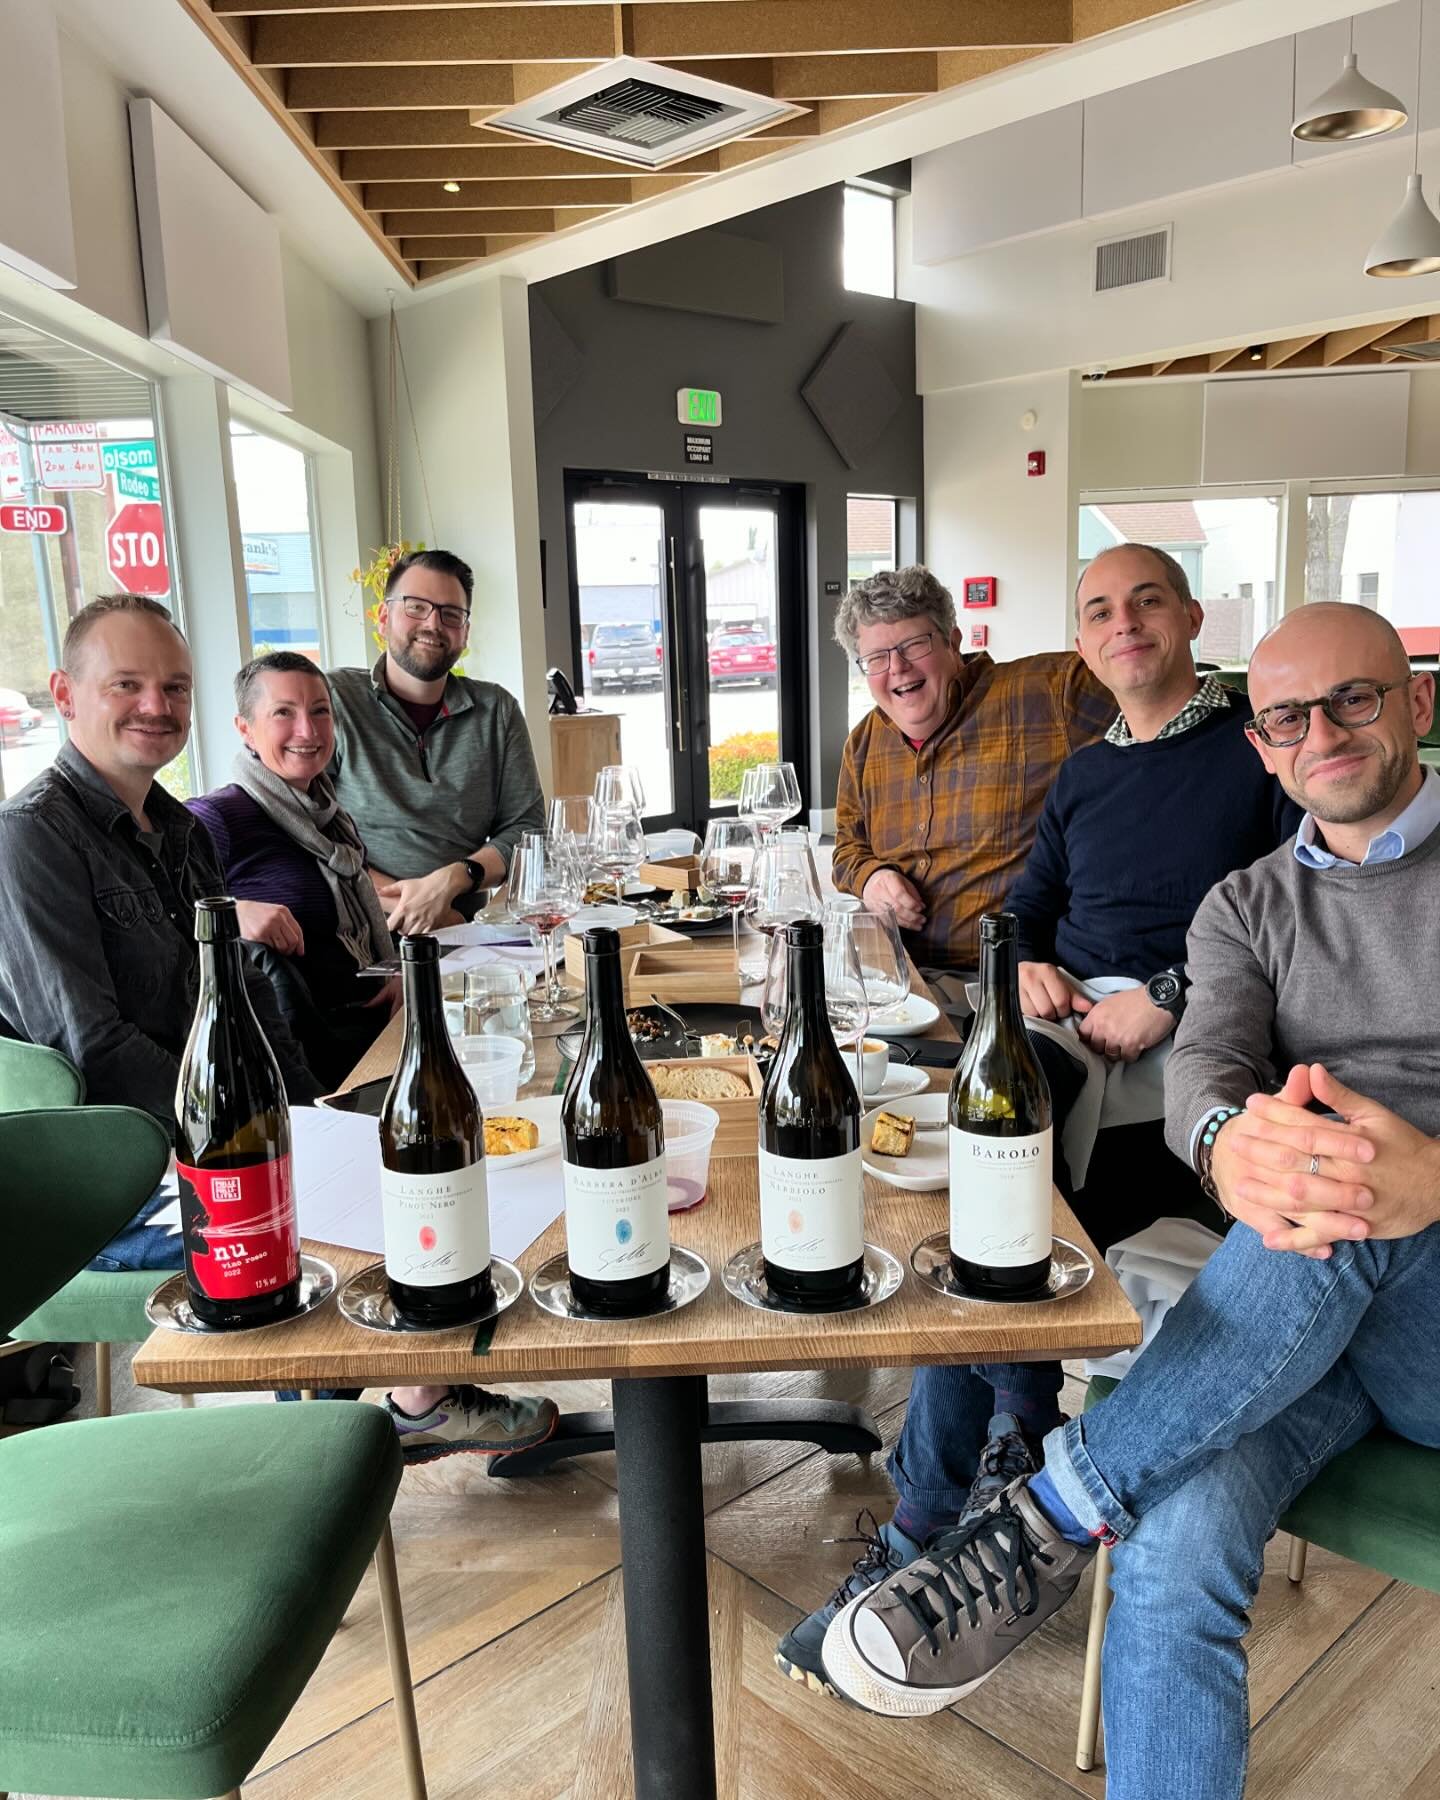 Photo dump wrap up of @gianluca_colombovini first visit to CA 😎🇮🇹🍷: 
1) Our now classic trade lunch at @allorasacramento with @grabishfarm @thepipwinebar @nico_wine_sacramento @ericd4 @mulvaneys_sacramento @hughweiler 
2) Our first trade lunch @b